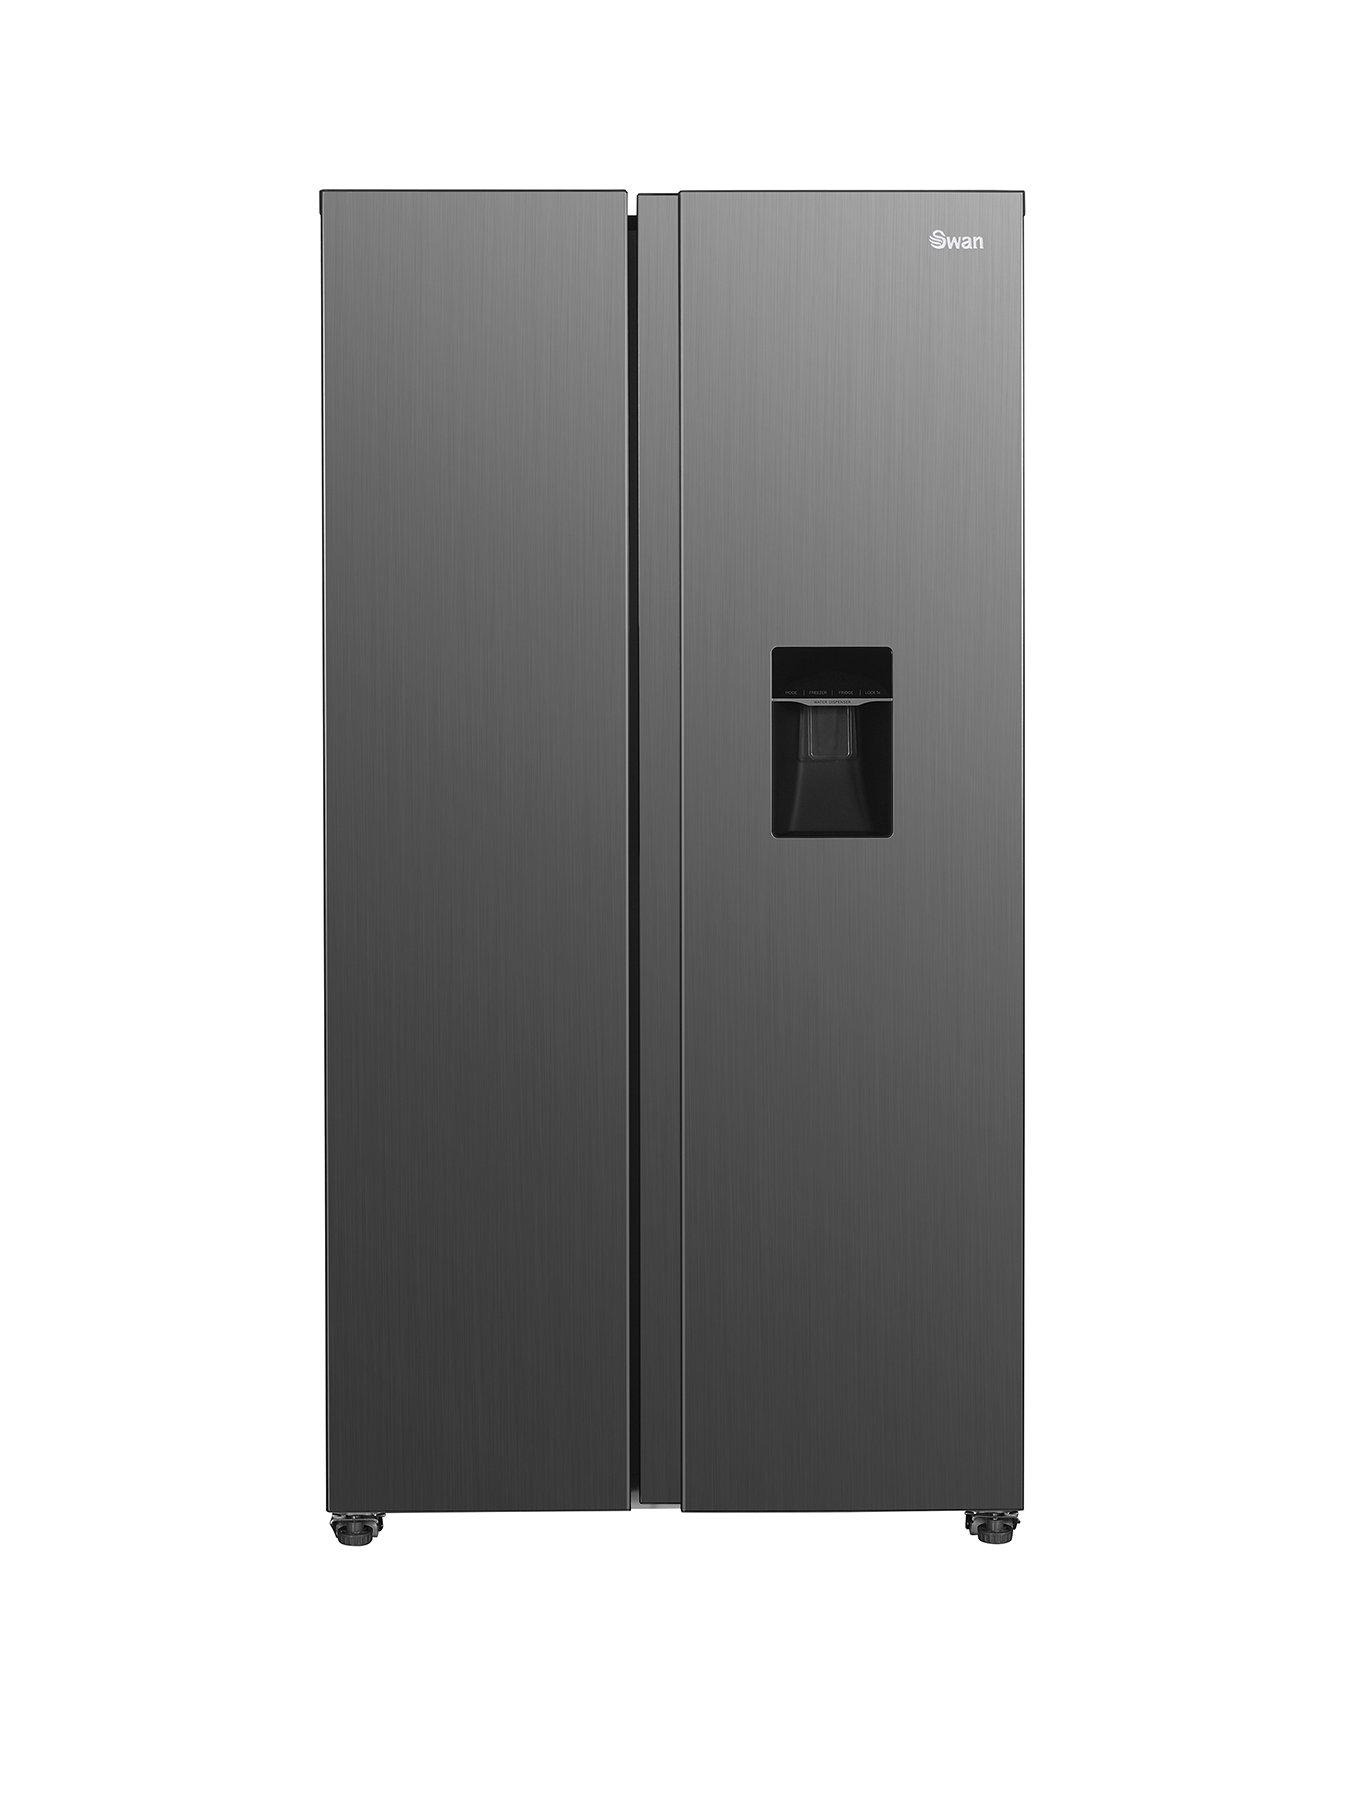 Russell Hobbs Low Frost Silver 60/40 Fridge Freezer, 173 Total Capacity,  Freestanding 50cm Wide 145cm High, Fast Freeze, Adjustable Thermostat,  RH50FF145S, 2 Year Guarantee : : Home & Kitchen